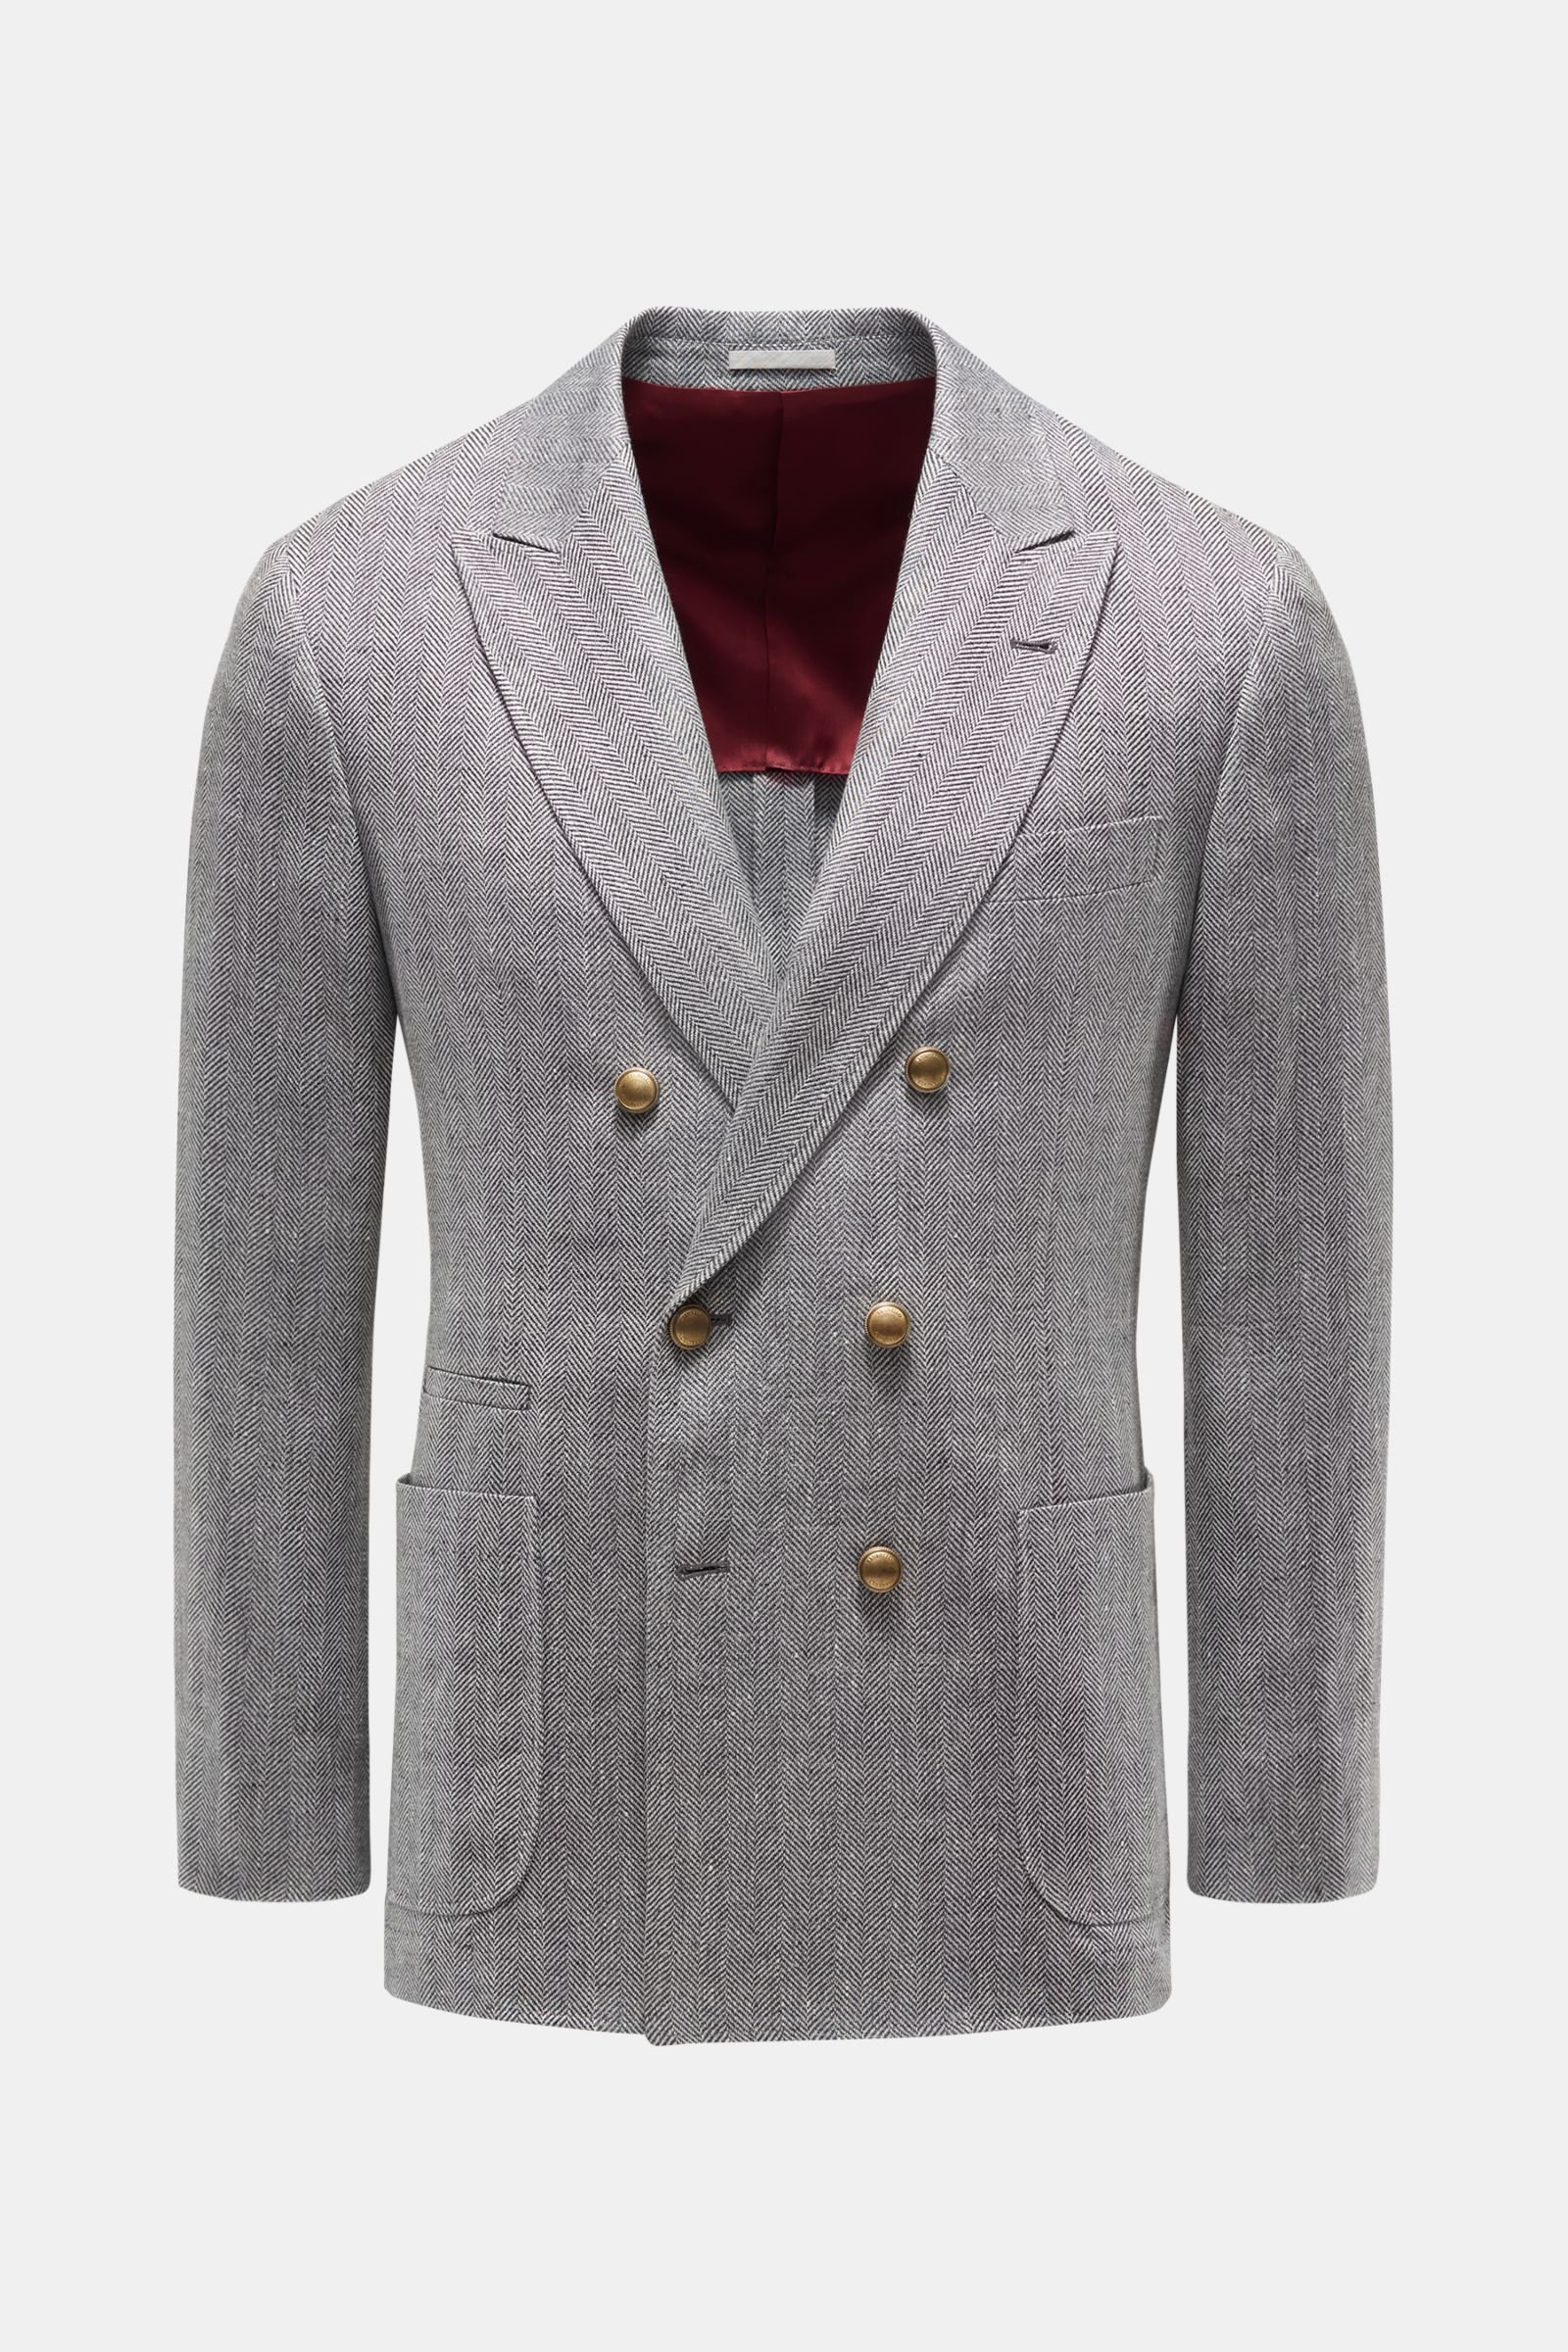 Smart-casual jacket grey/off-white patterned